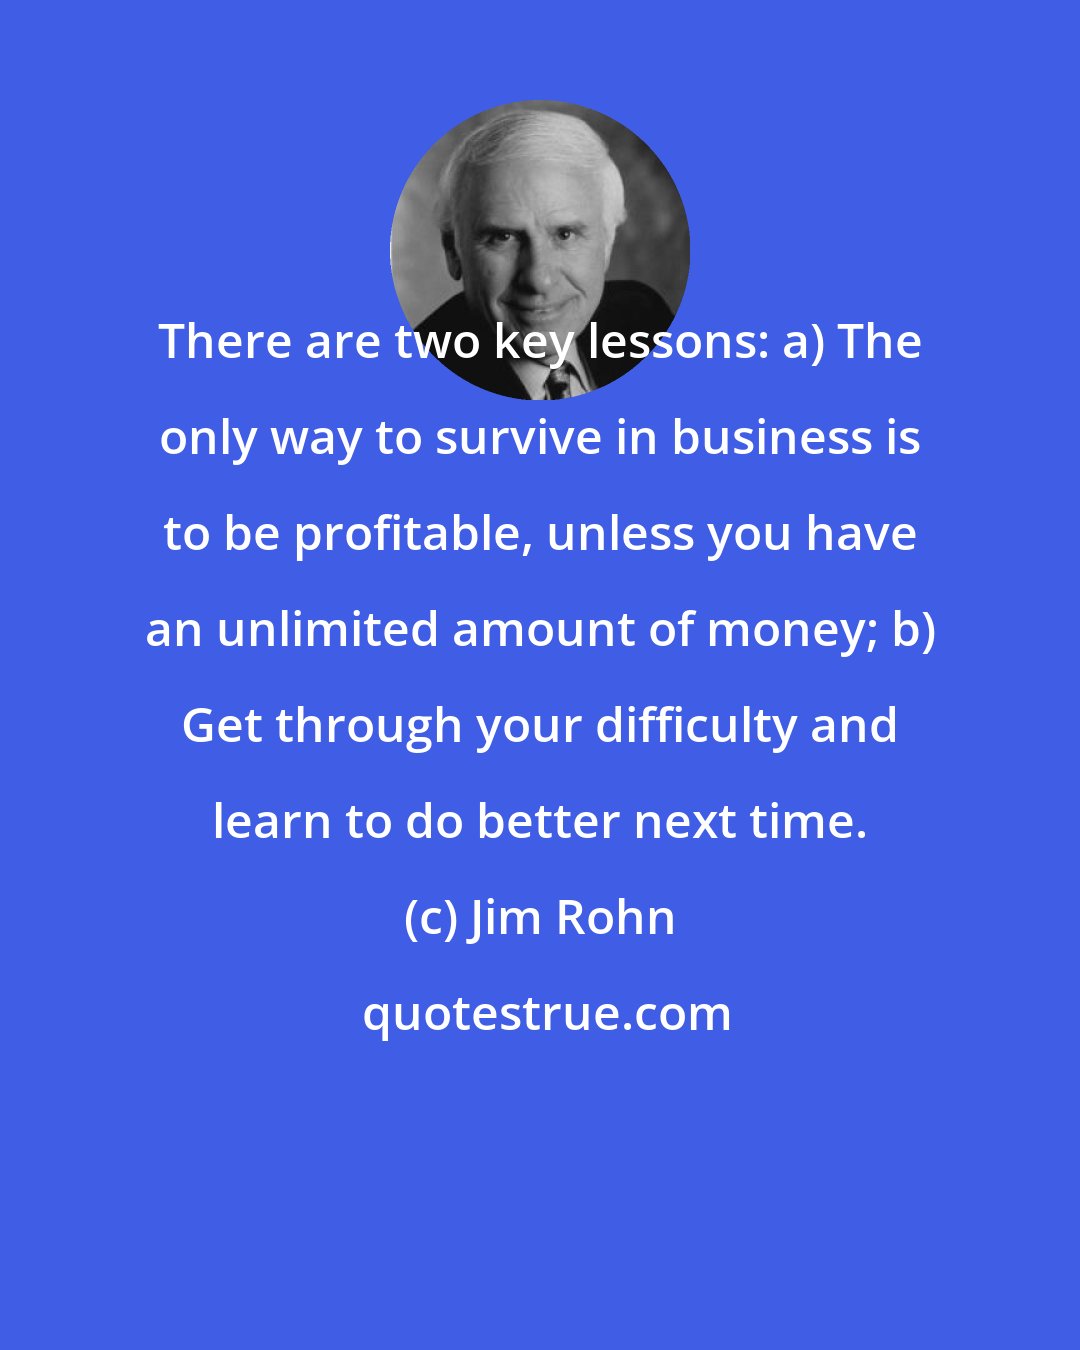 Jim Rohn: There are two key lessons: a) The only way to survive in business is to be profitable, unless you have an unlimited amount of money; b) Get through your difficulty and learn to do better next time.